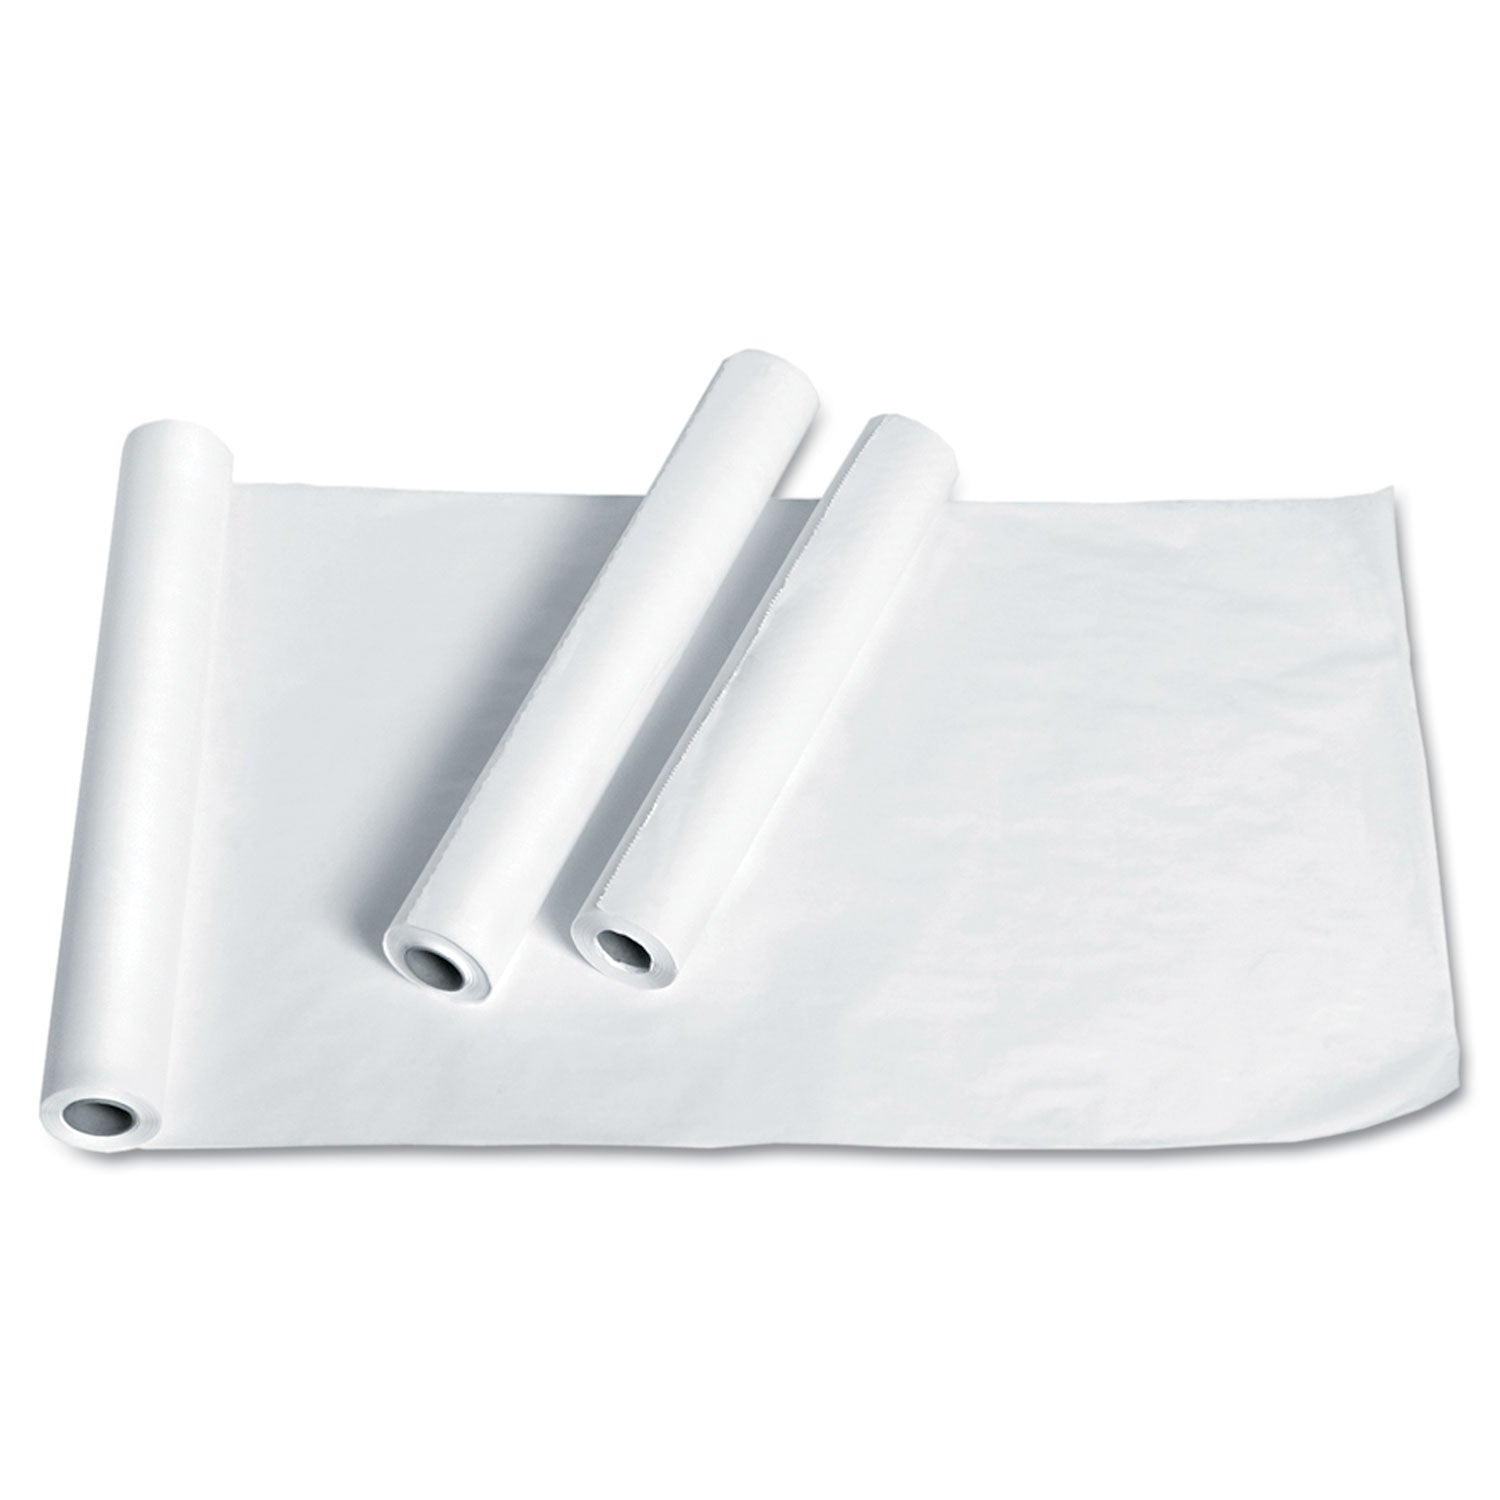 Exam Table Paper, Deluxe Smooth, 21" x 225 ft, White, 12 Rolls/Carton - 